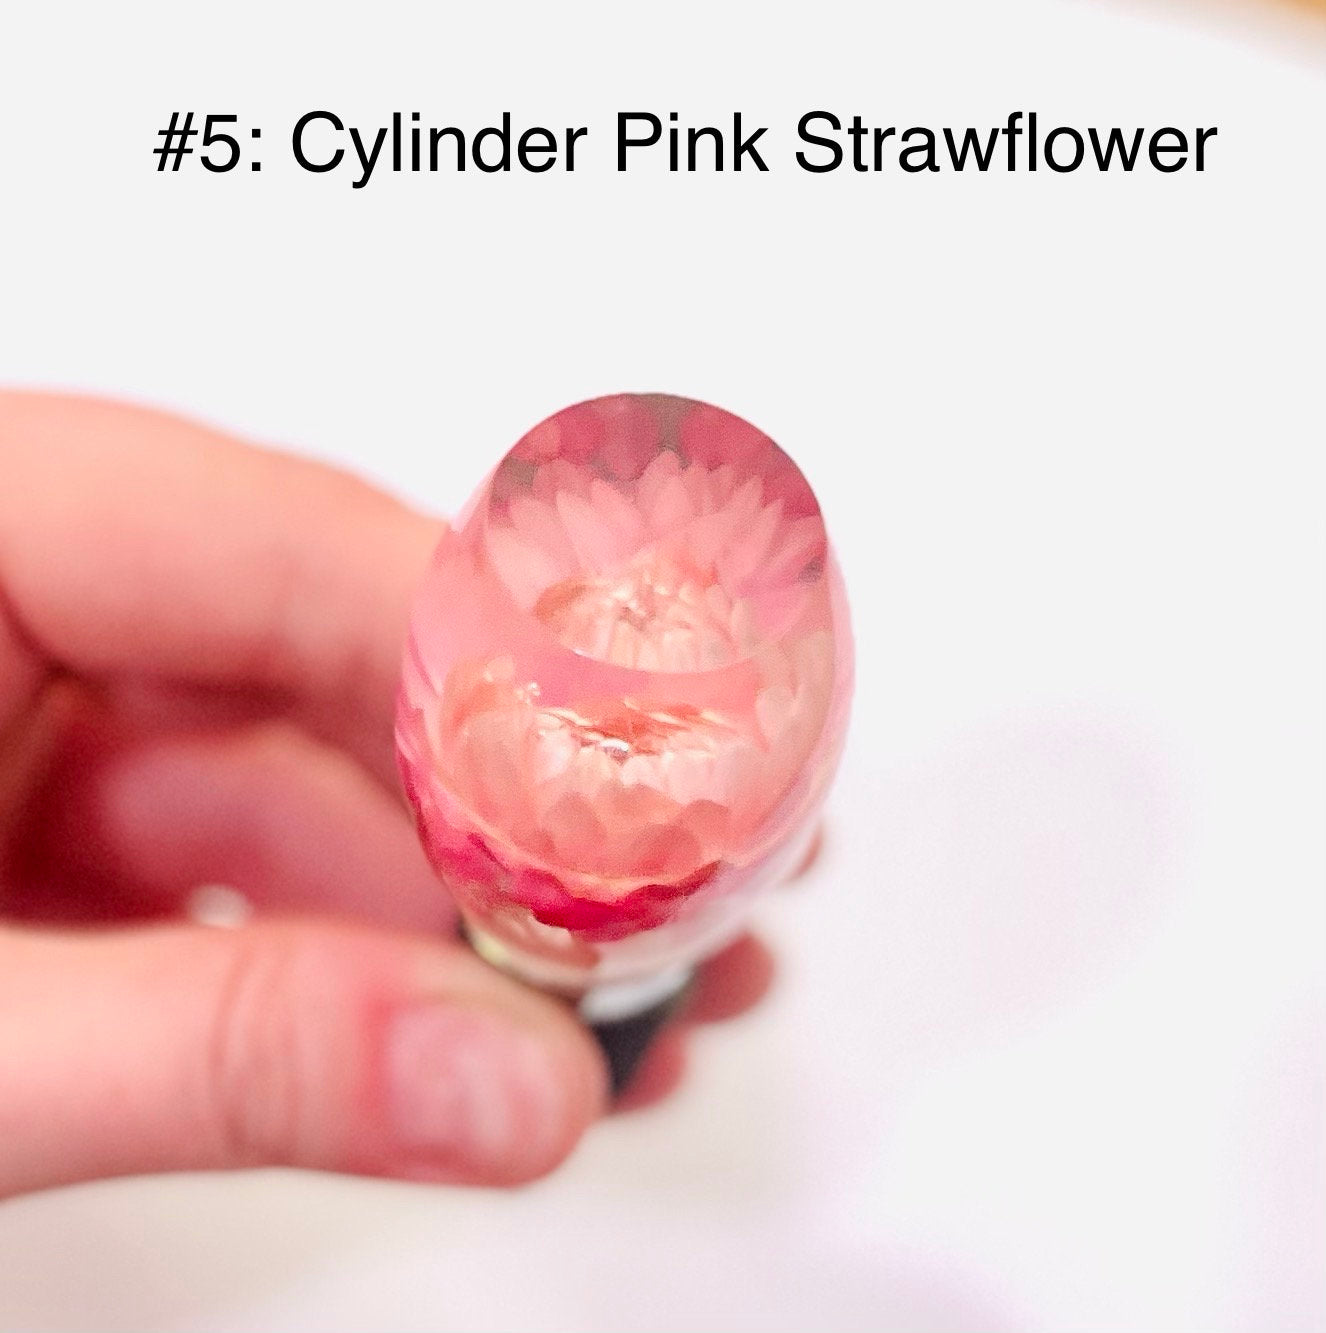 Casted Floral Resin Wine Stopper. Made with Beautiful Real Flowers. Gift for birthdays, mother's day, holidays. One of a kind gift for wedding guests.